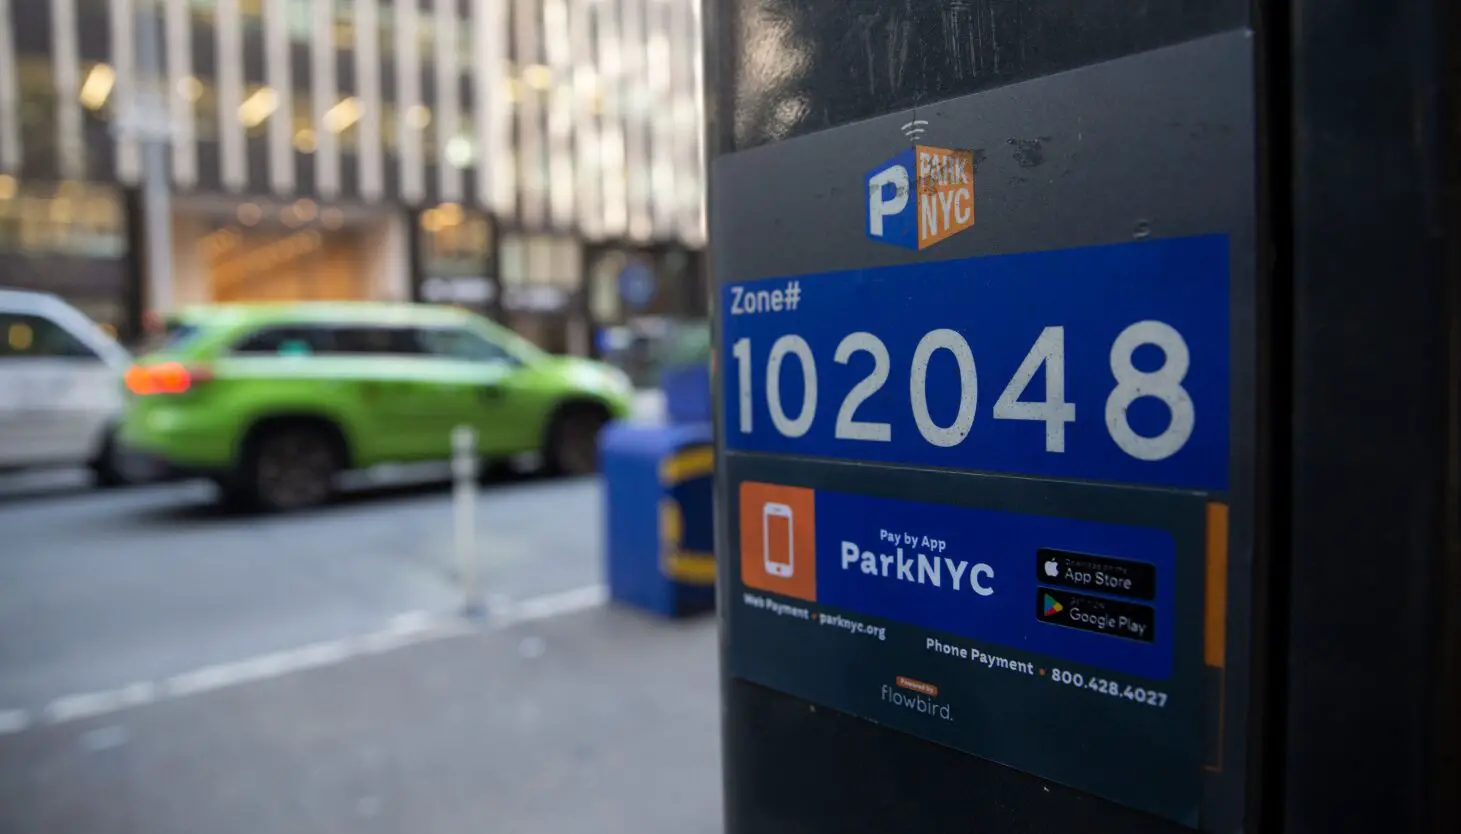 Parking App Glitches and New 20-Cent Fee Miff Motorists